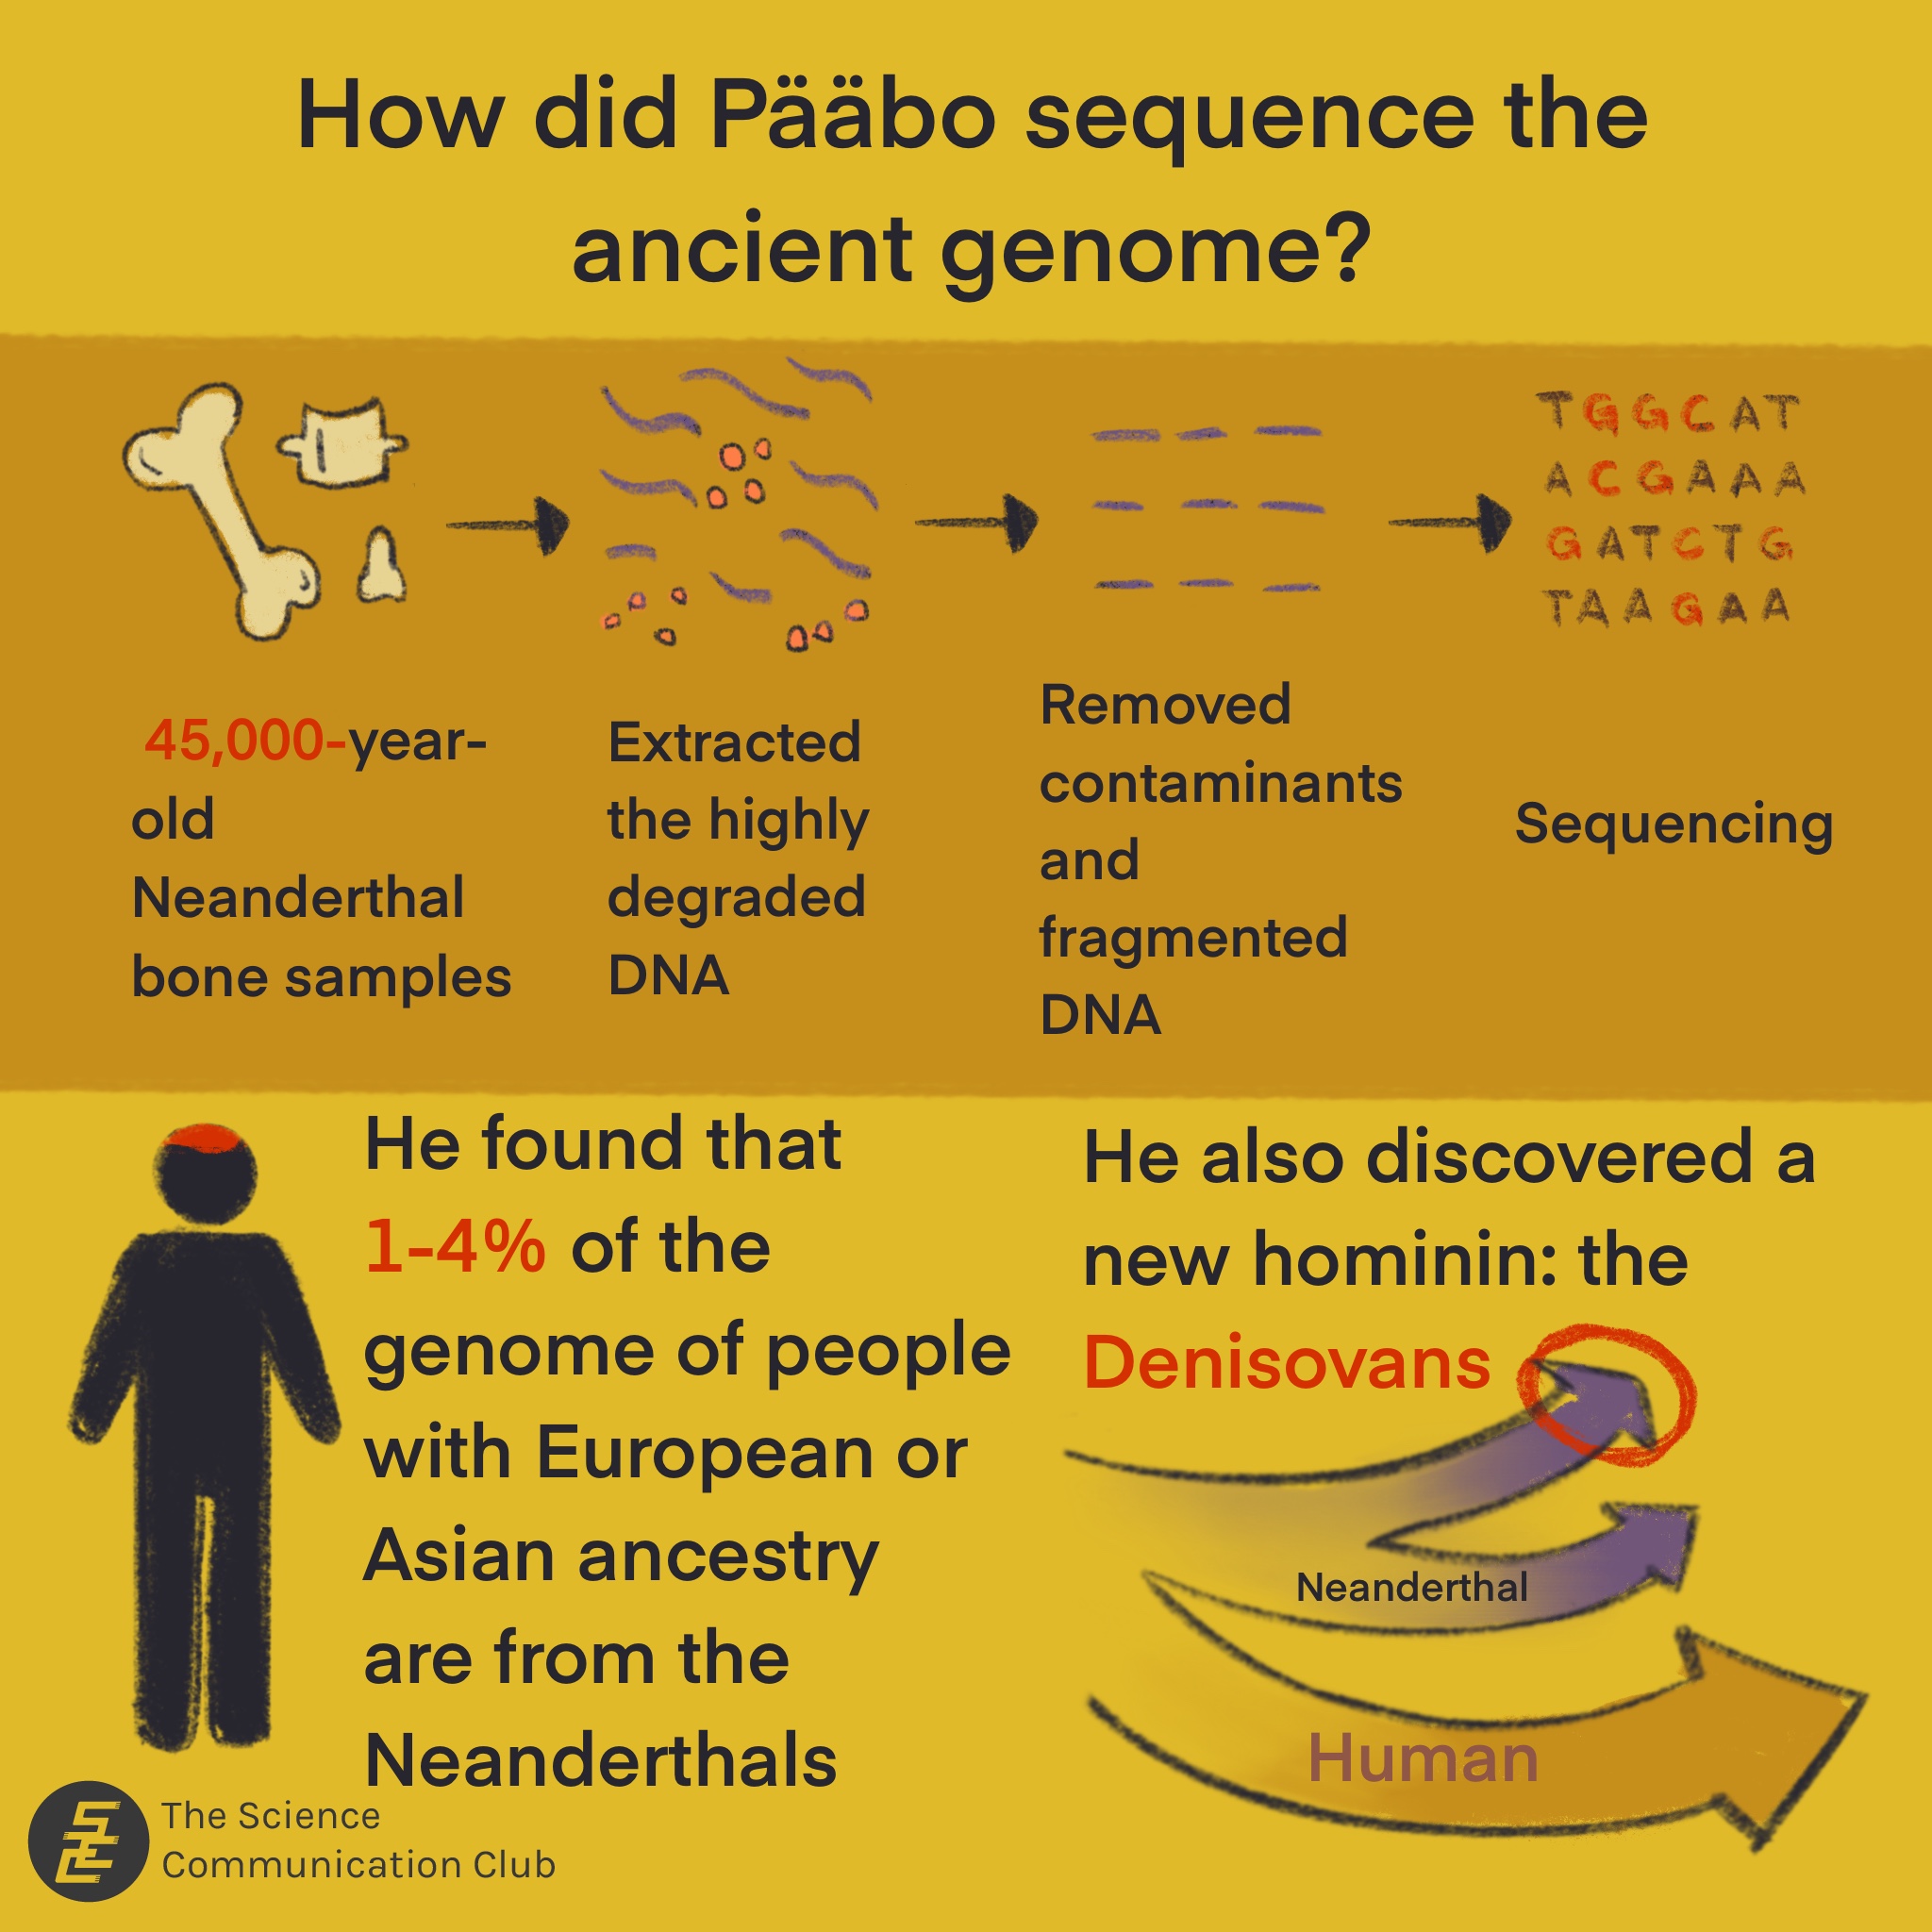 An infographic summarizing the Neanderthal DNA Sequencing experiment. Text: How did Pääbo sequence the ancient genome? Step 1. 45,000-year-old bones. Step 2. Extracted the highly degraded DNA. Step 3: Removed contaminants and fragment DNA. Step 4: Sequencing. He found that 1-4% of the genome of people with European or Asian ancestry are from the Neanderthals. He also discovered a new hominin: the Denisovans. Hominin refers to the group of modern humans, extinct human species, and immediate human ancestors.